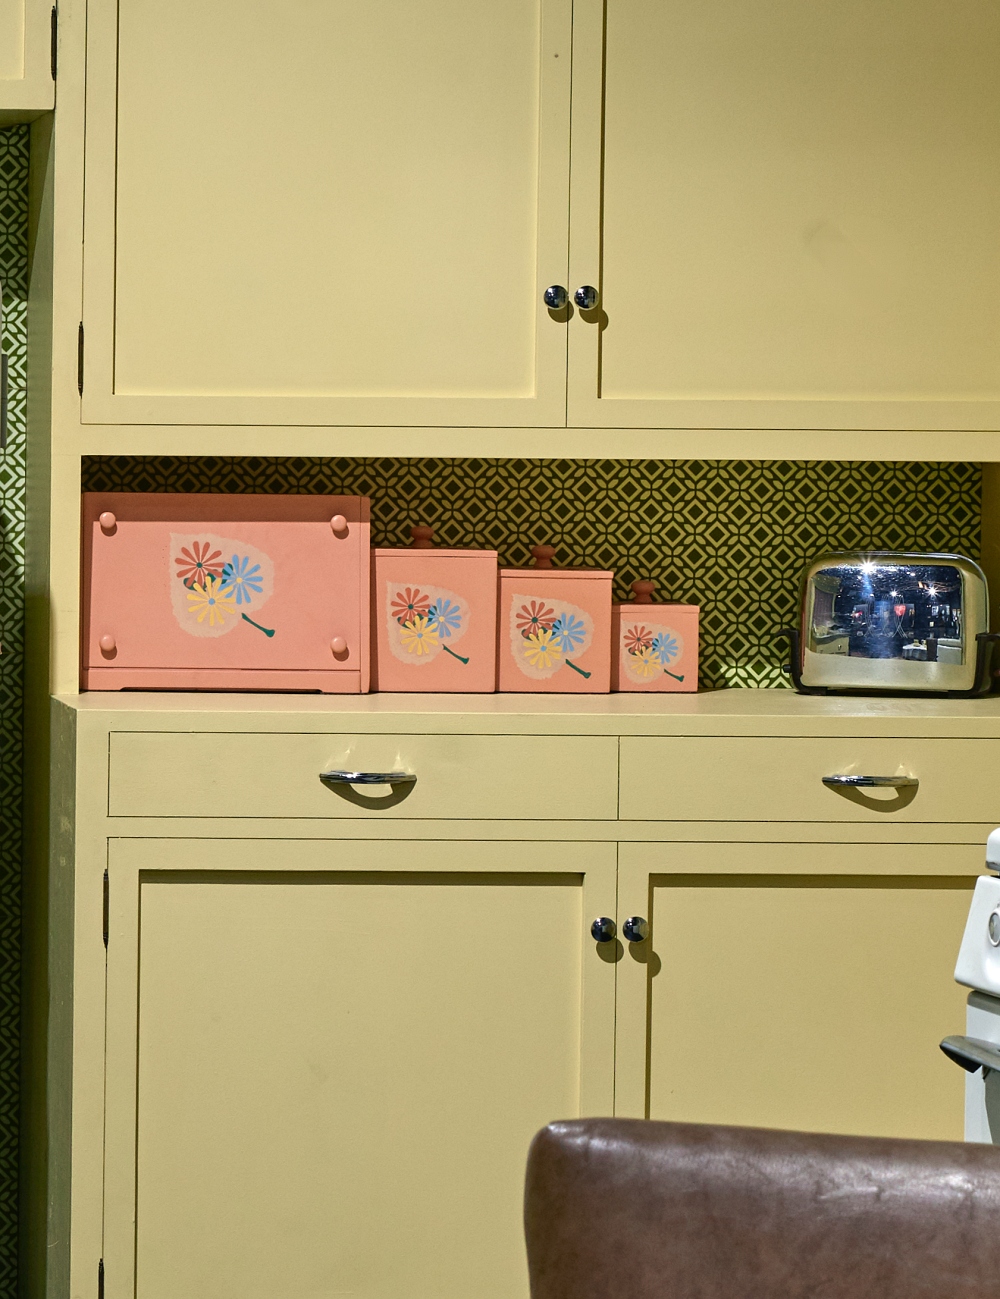 I Love Lucy kitchen set display close up